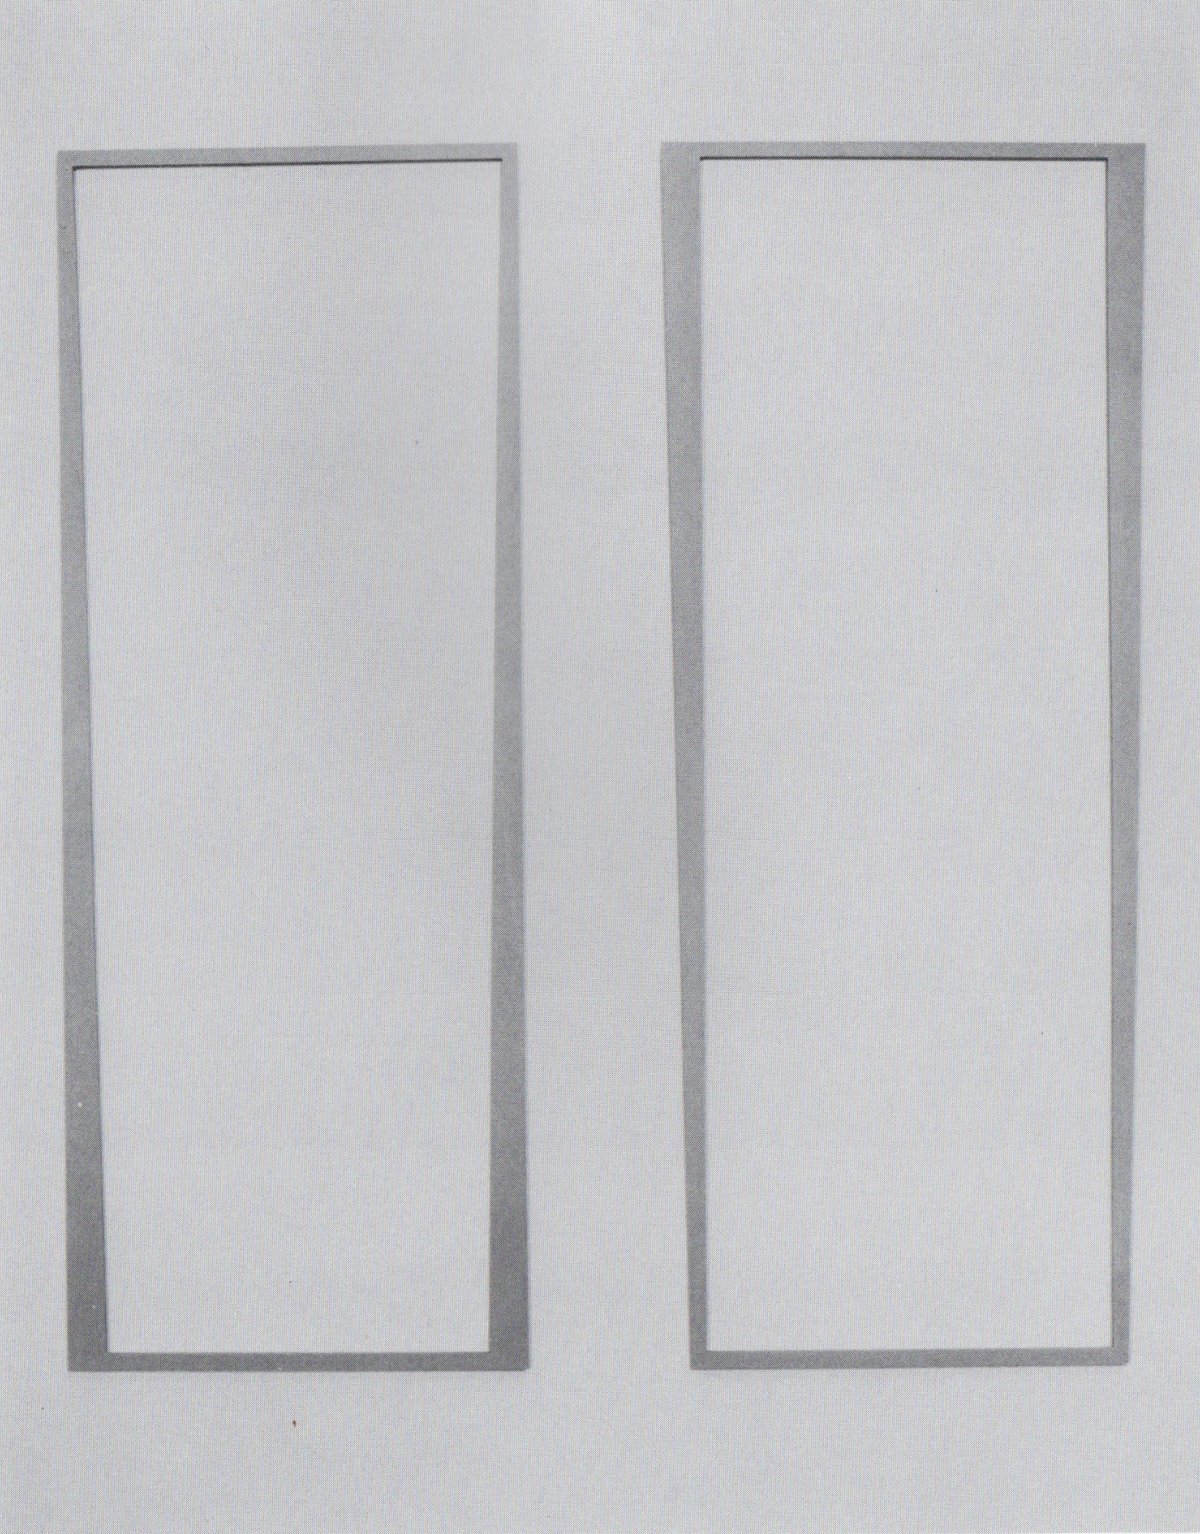 (fig. 5) &quot;two frames III&quot; (1979), painted wood, 143 x 56,5 cm